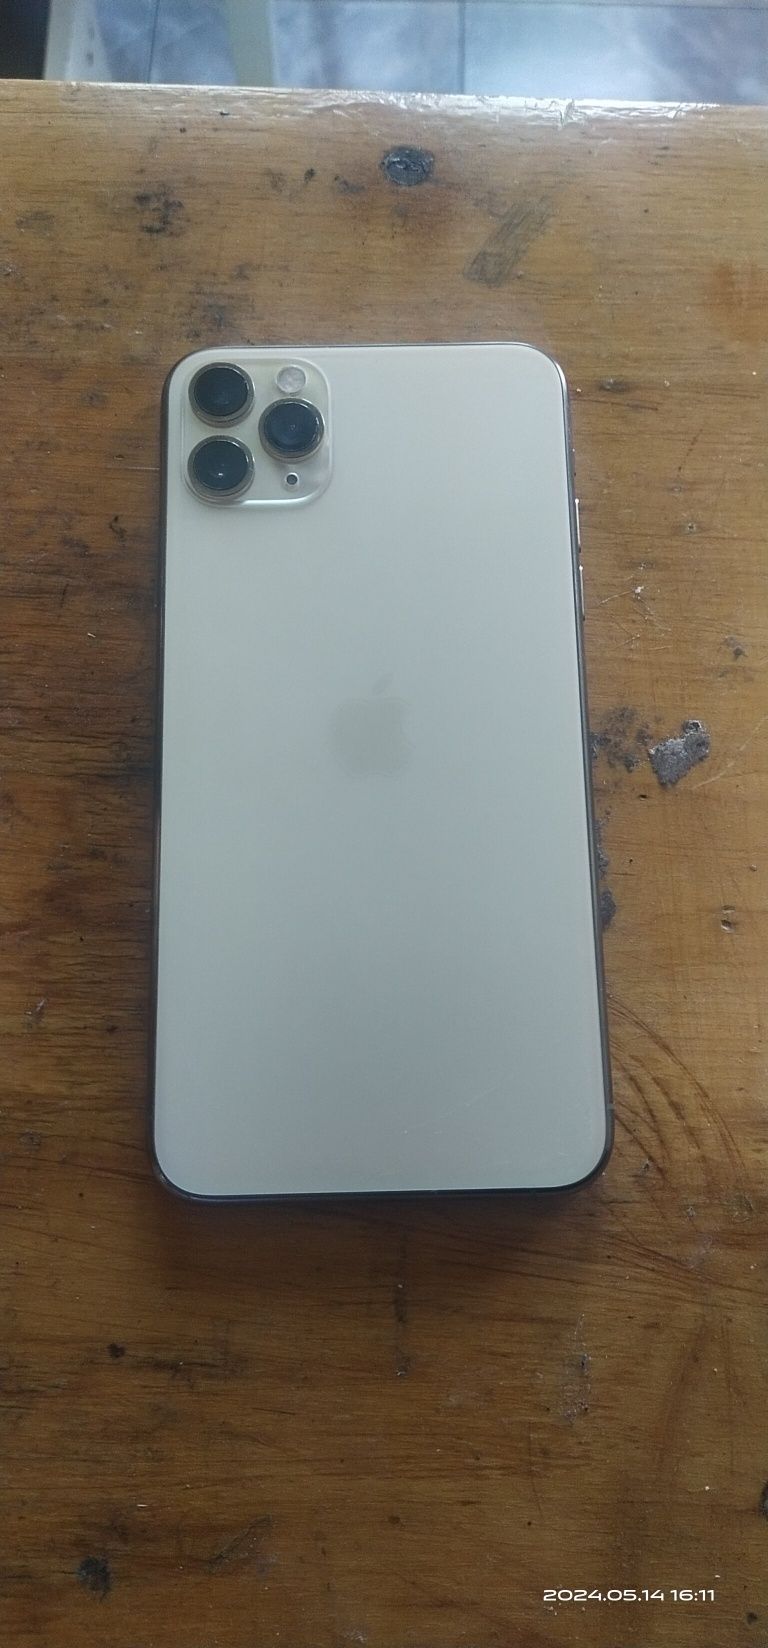 iPhone 11 pro max 256 gb + airpods pro 2 + chexol